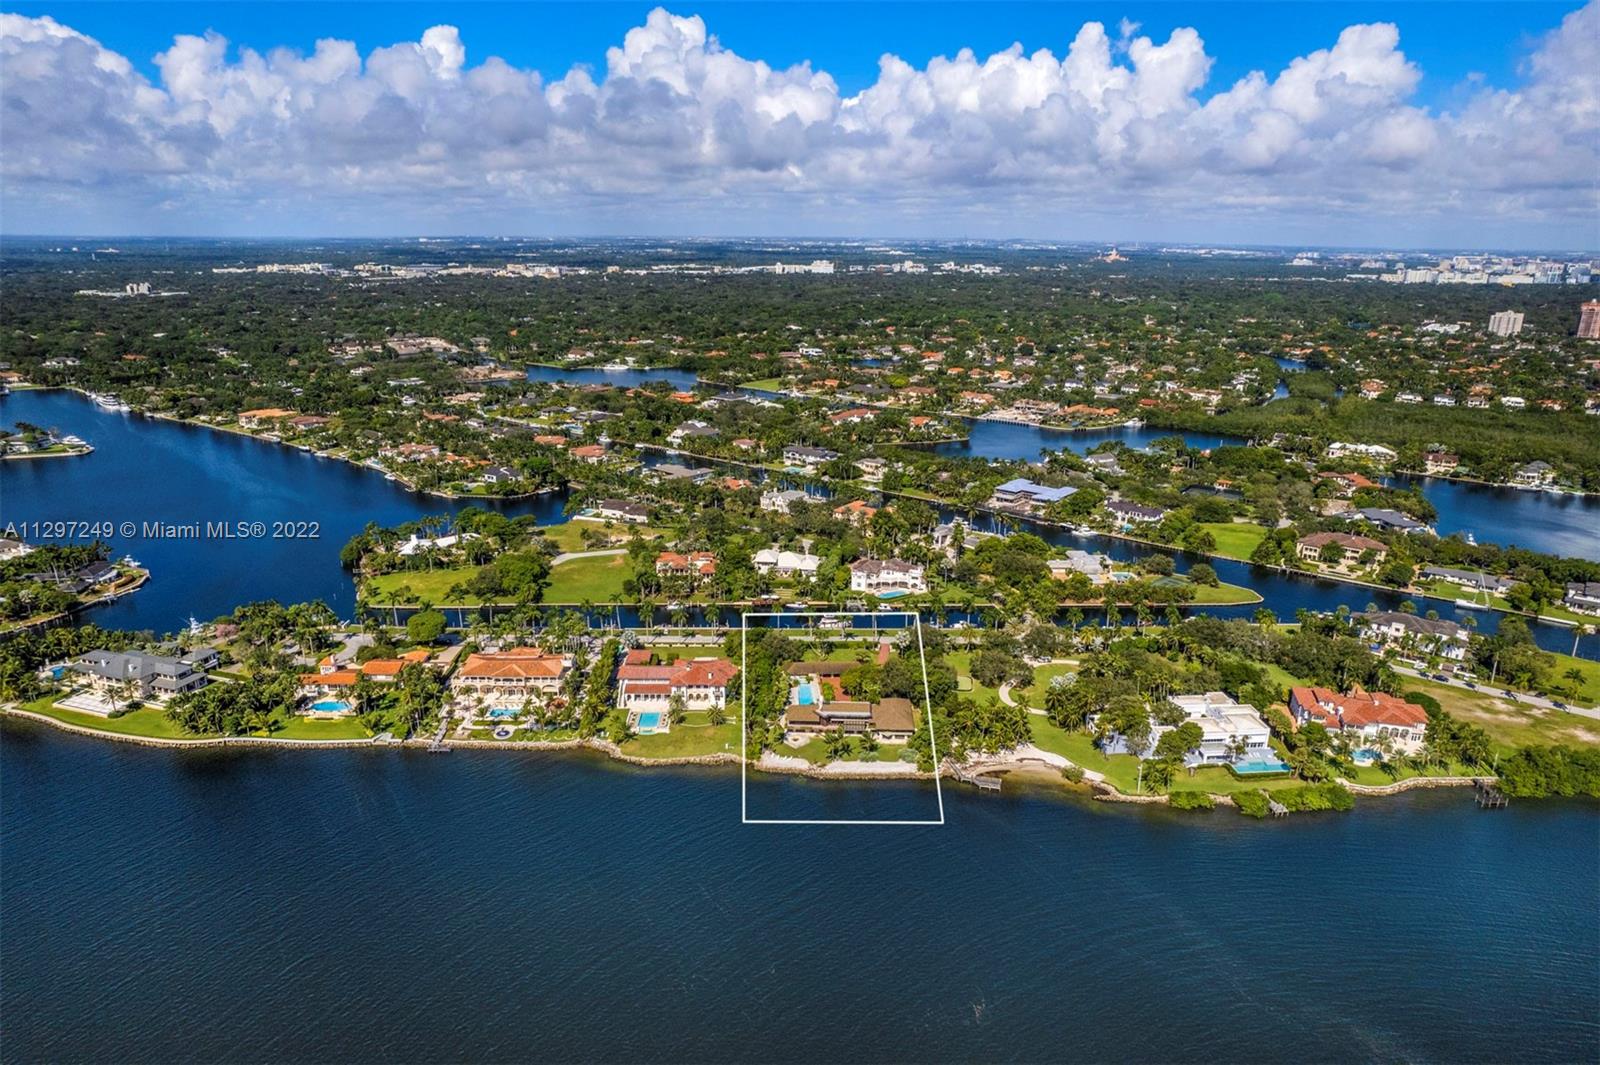 A once in a generation opportunity to own one of South Florida’s premiere properties inside the gated and exclusive community of Gables Estates.  This almost 2 acre property, with 200 feet of direct water frontage on Biscayne Bay, allows one to enjoy expansive and unobstructed views out to Key Biscayne, Stiltsville and the ocean. An additional 200 feet of seawall, on a private and protected waterway, is located in the back of the property to dock your yacht.  Build your dream home or renovate the existing property. The possibilities… like the views…are endless.  This is truly a one of a kind property that is rarely ever on the market.